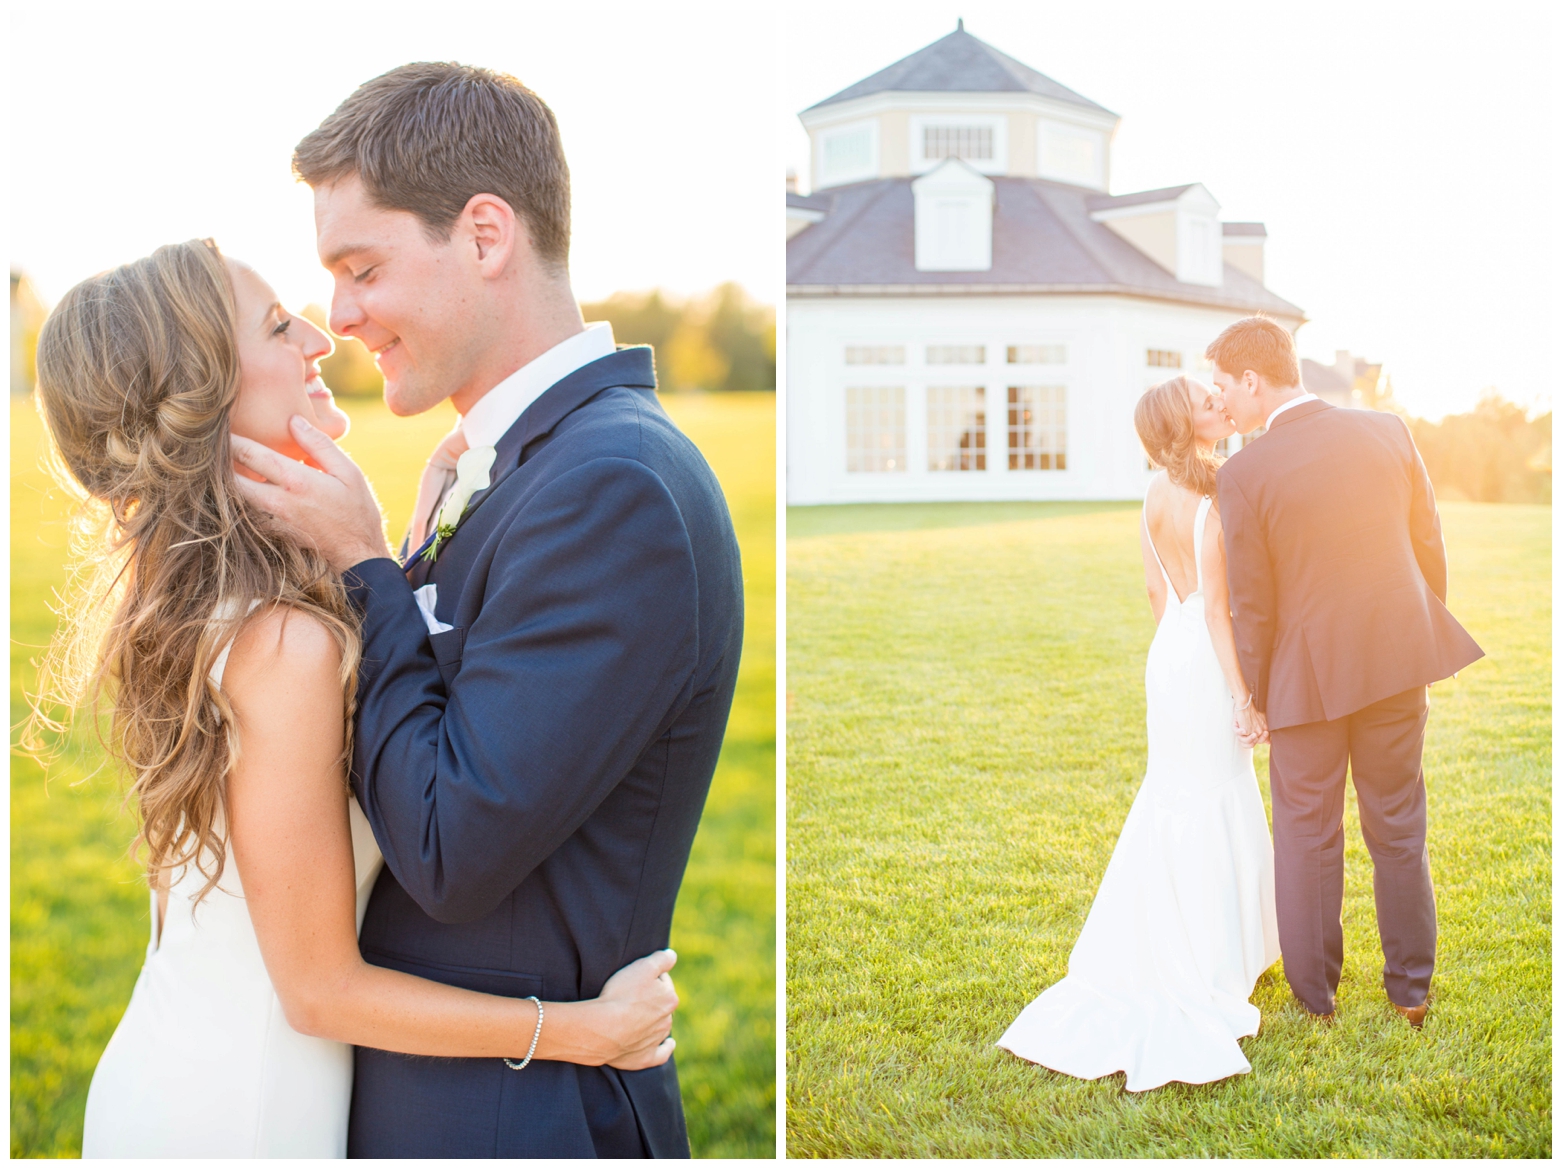 View More: http://hopetaylorphotographyphotos.pass.us/emily-and-kyle